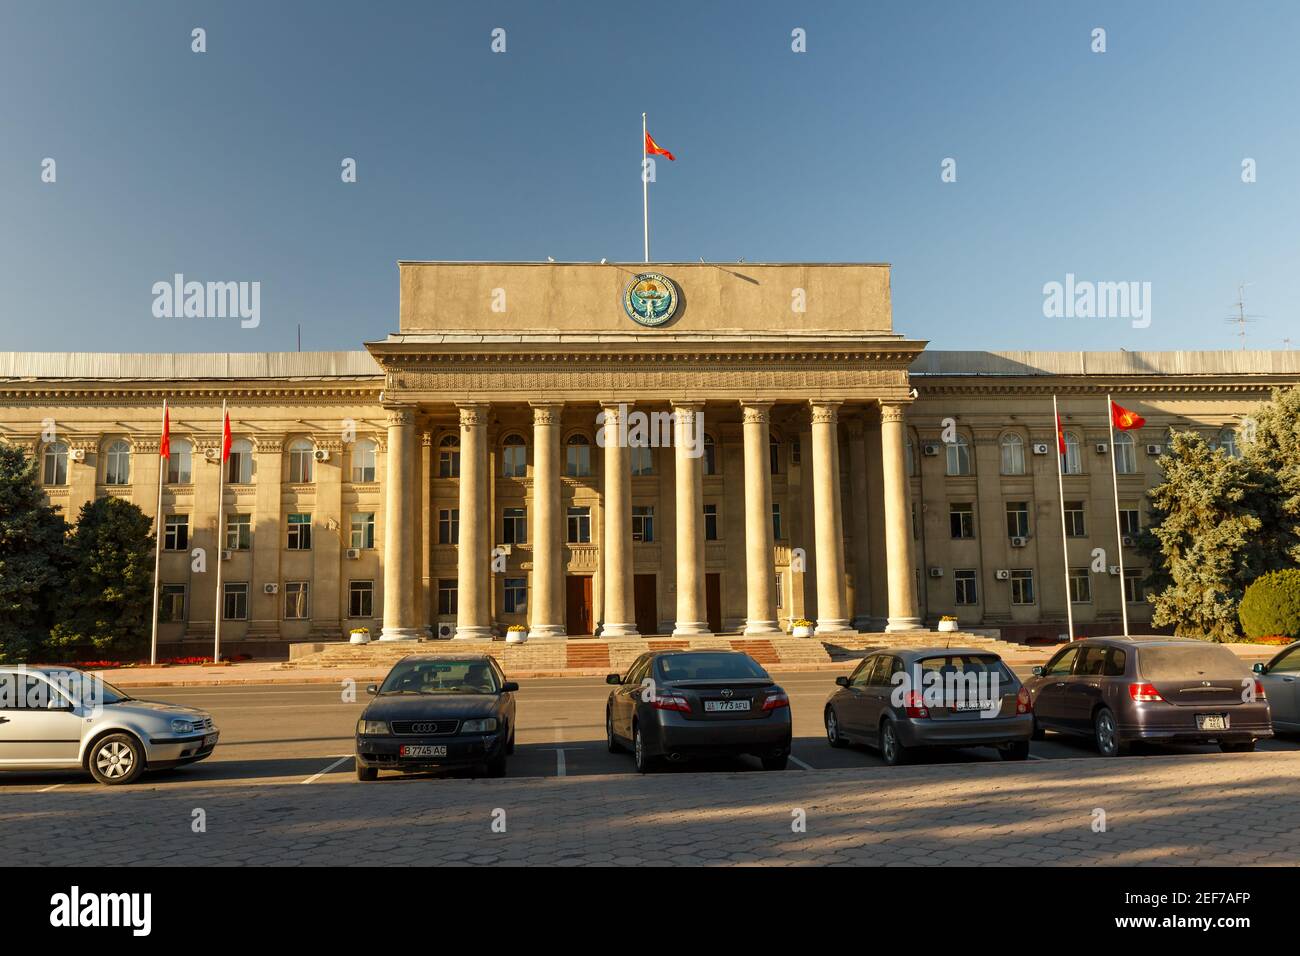 Bishkek, Kyrgyzstan - September 18, 2019: Government of the Kyrgyz Republic. The Office of the Prime Minister of Kyrgyzstan. Stock Photo